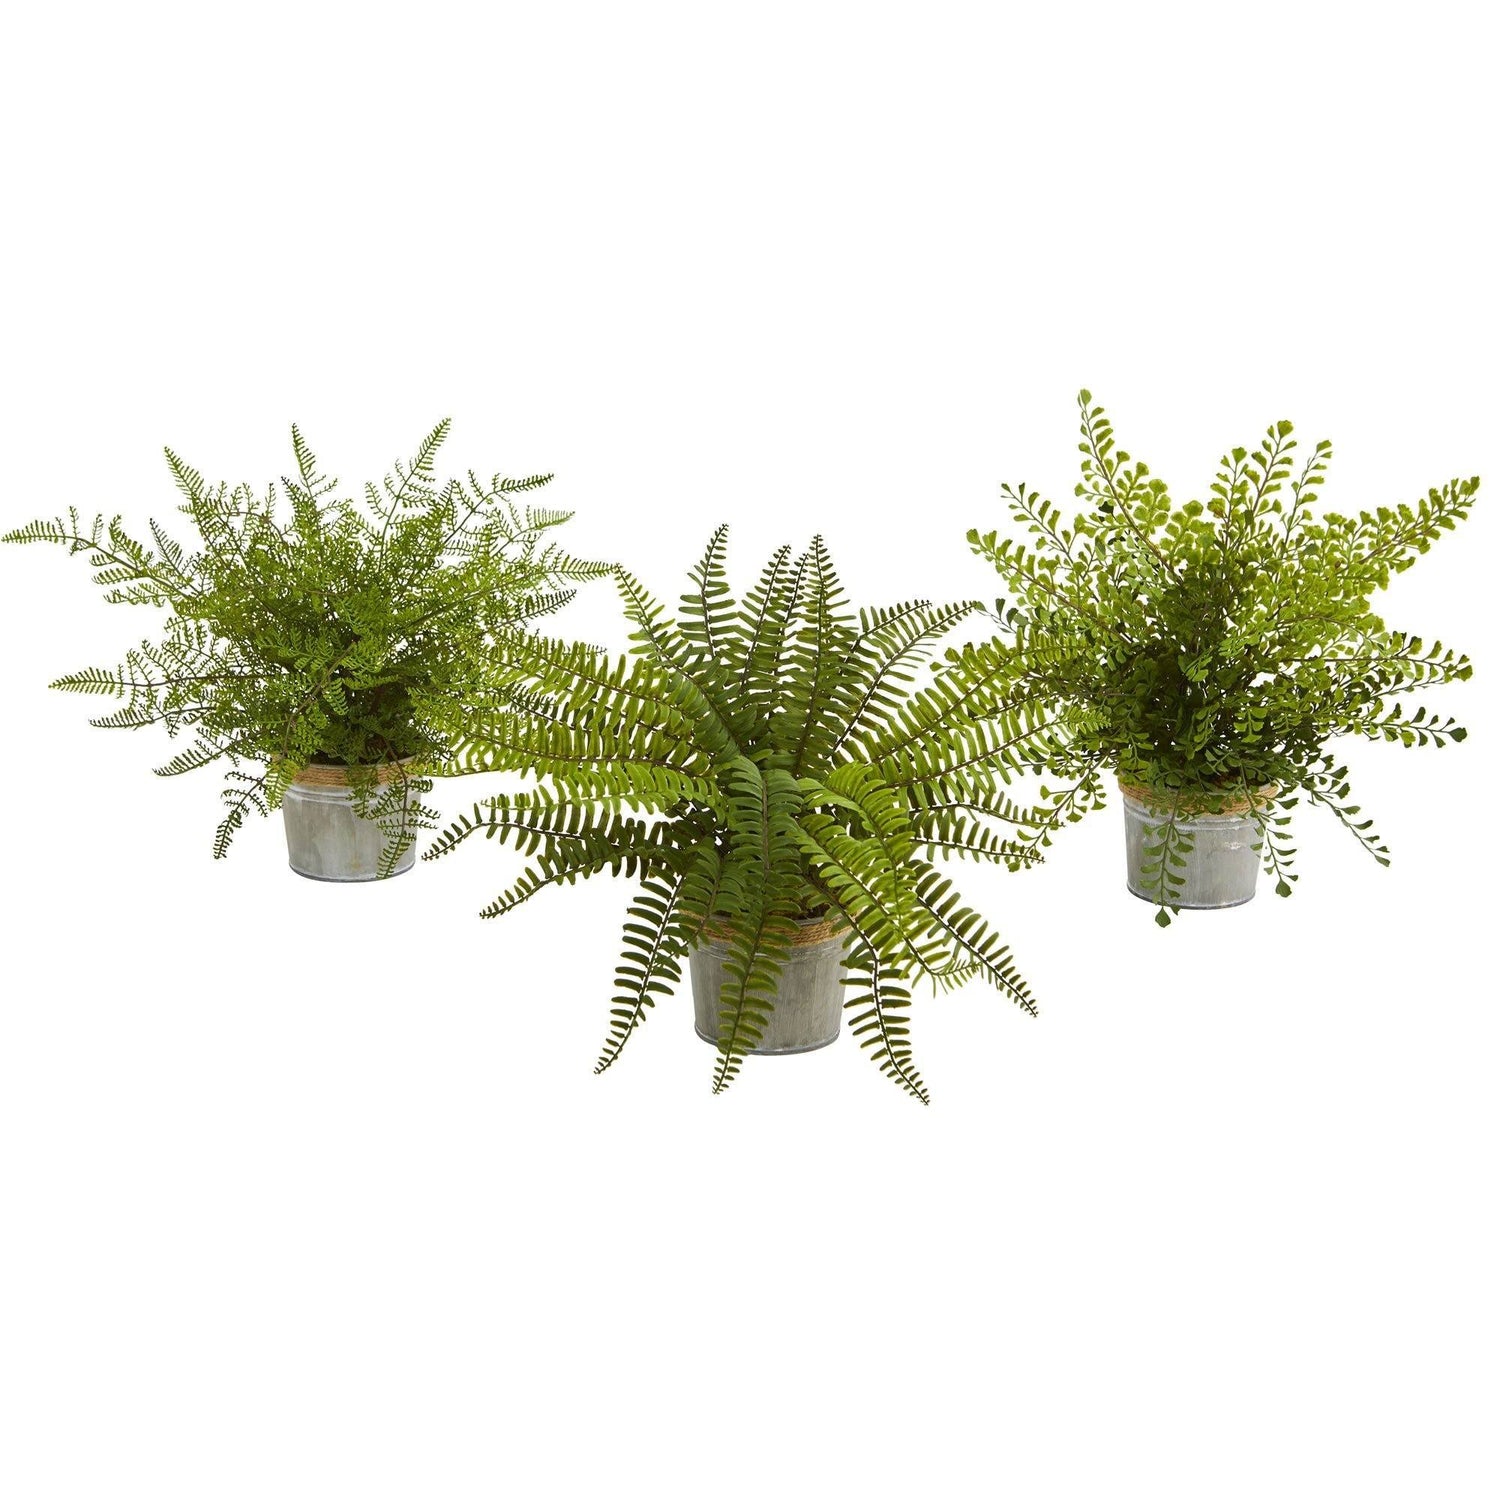 14” Assorted Ferns with Planter Artificial Plant (Set of 3)